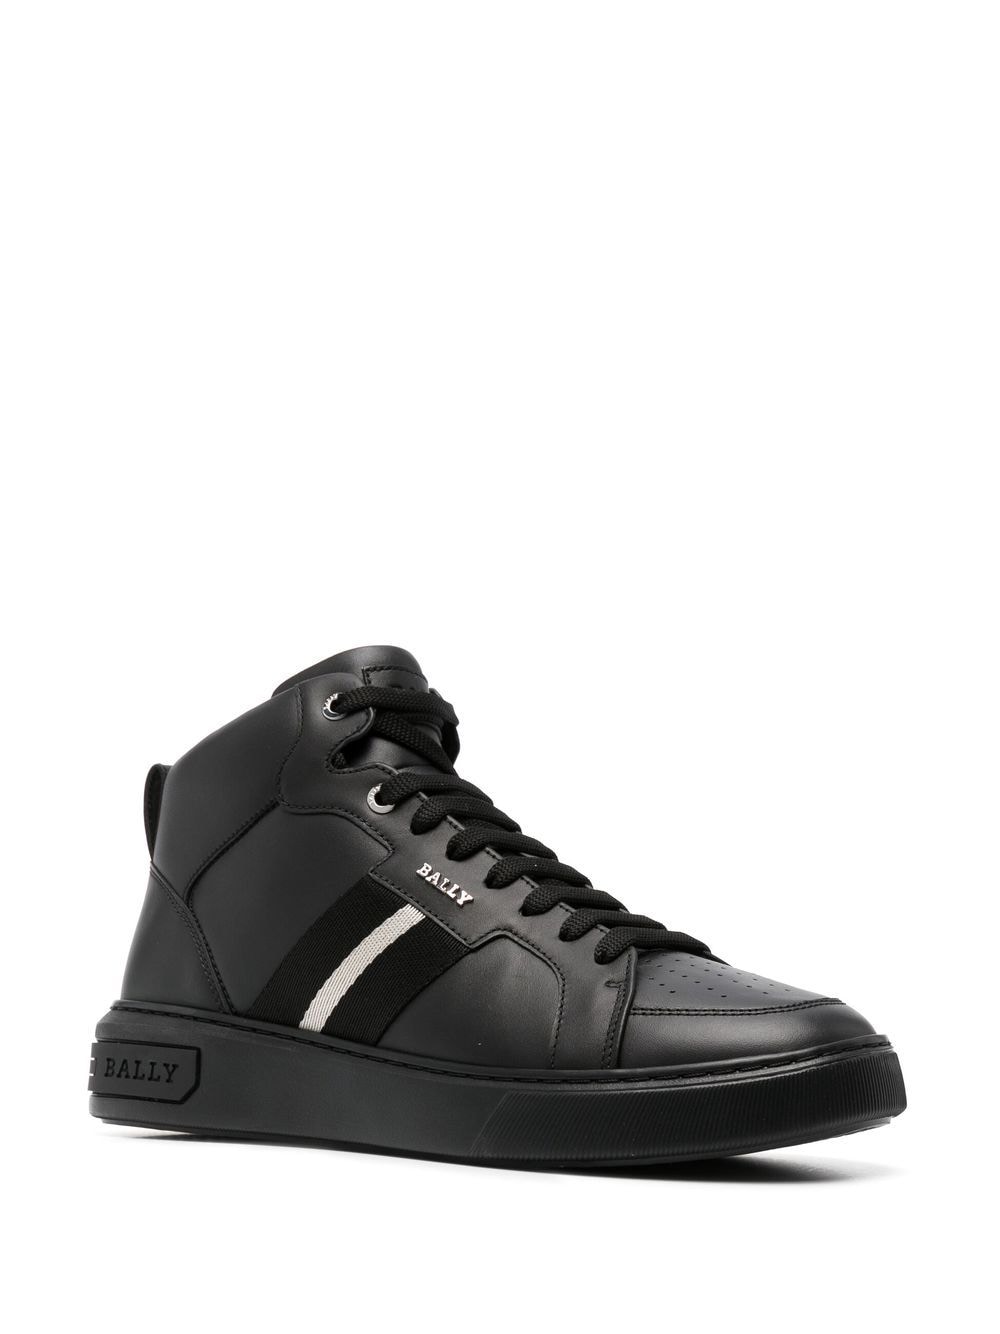 Image 2 of Bally stripe-detail high-top sneakers